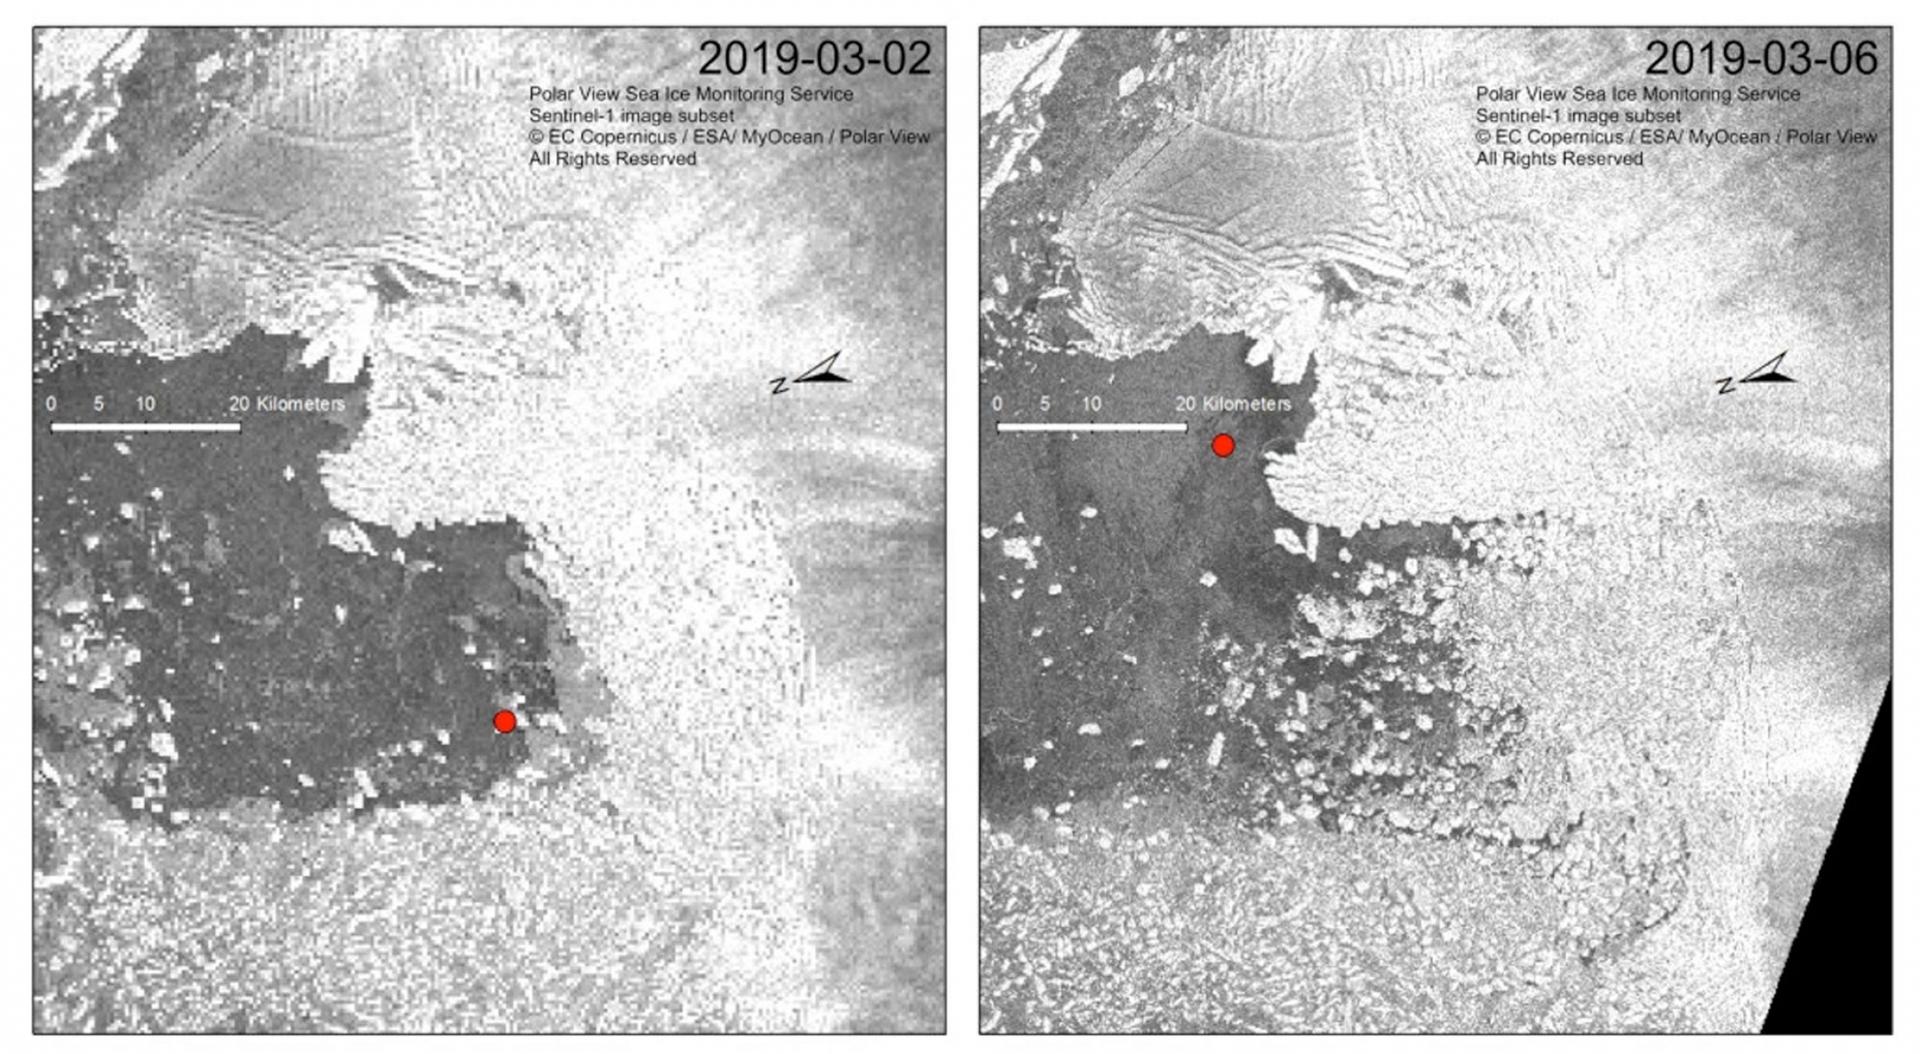 Two images side by side show ice bergs around a red dot